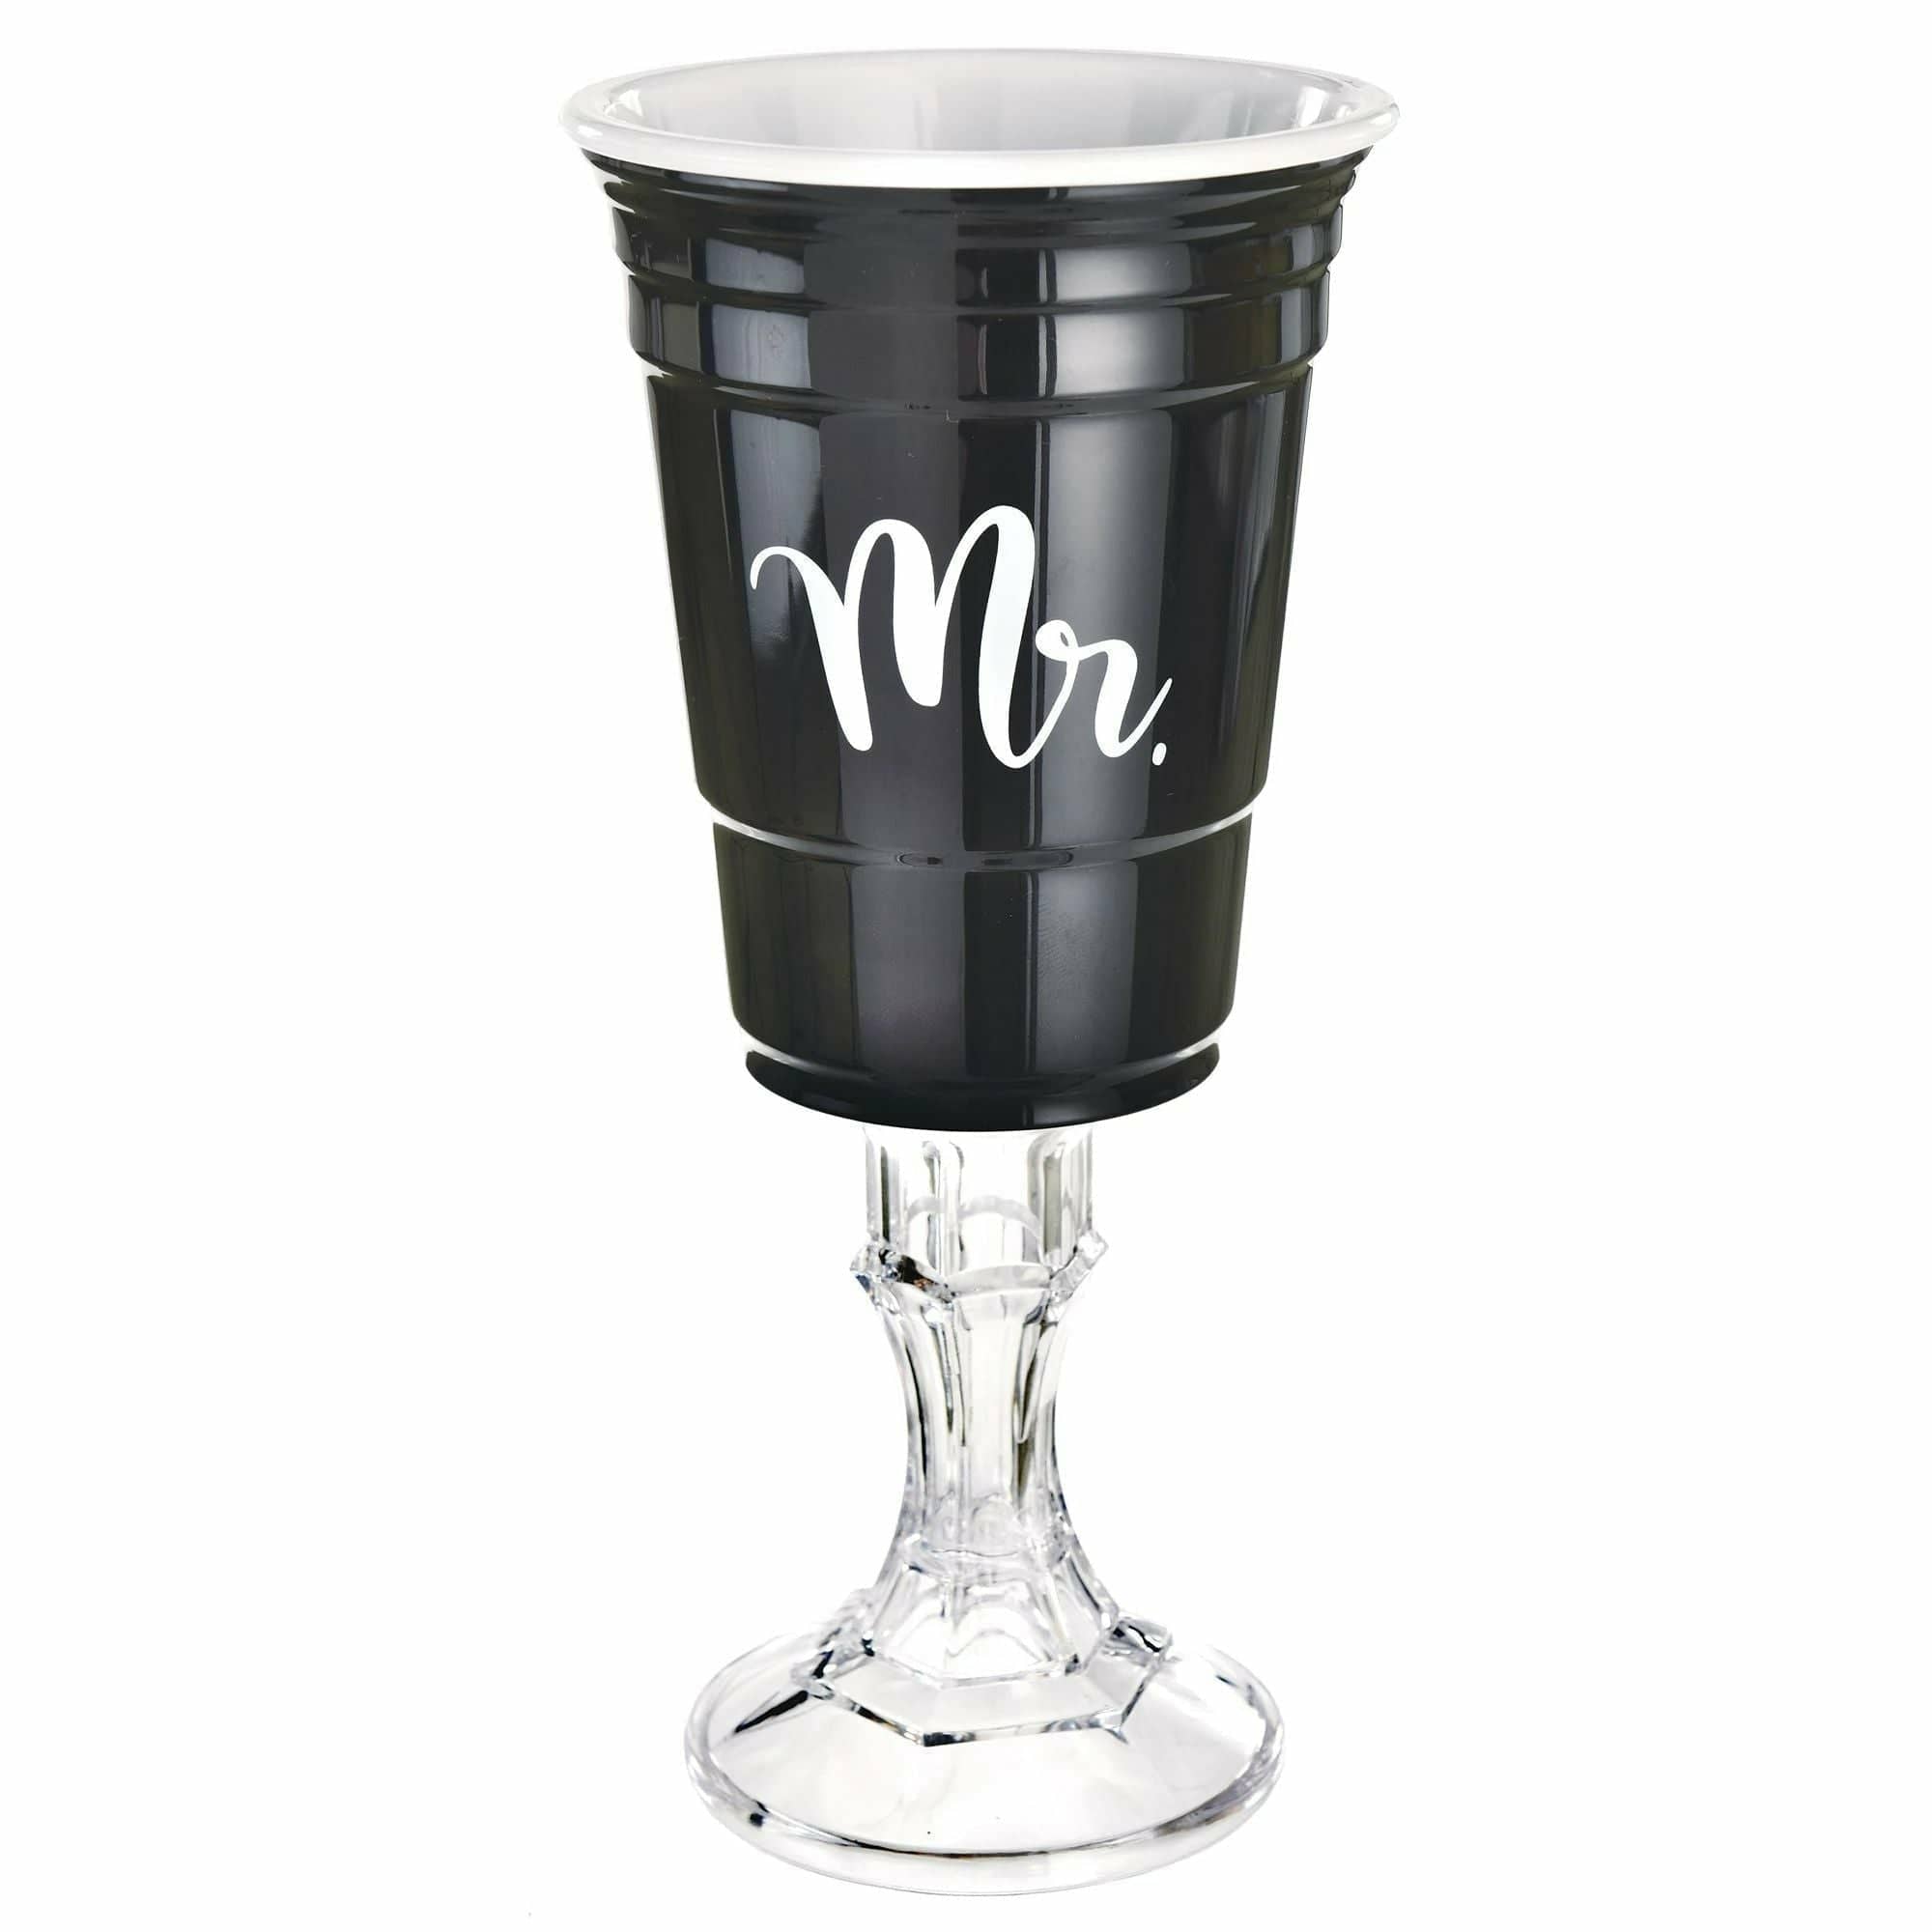 Amscan WEDDING Mr. Party Cup w/ Stand